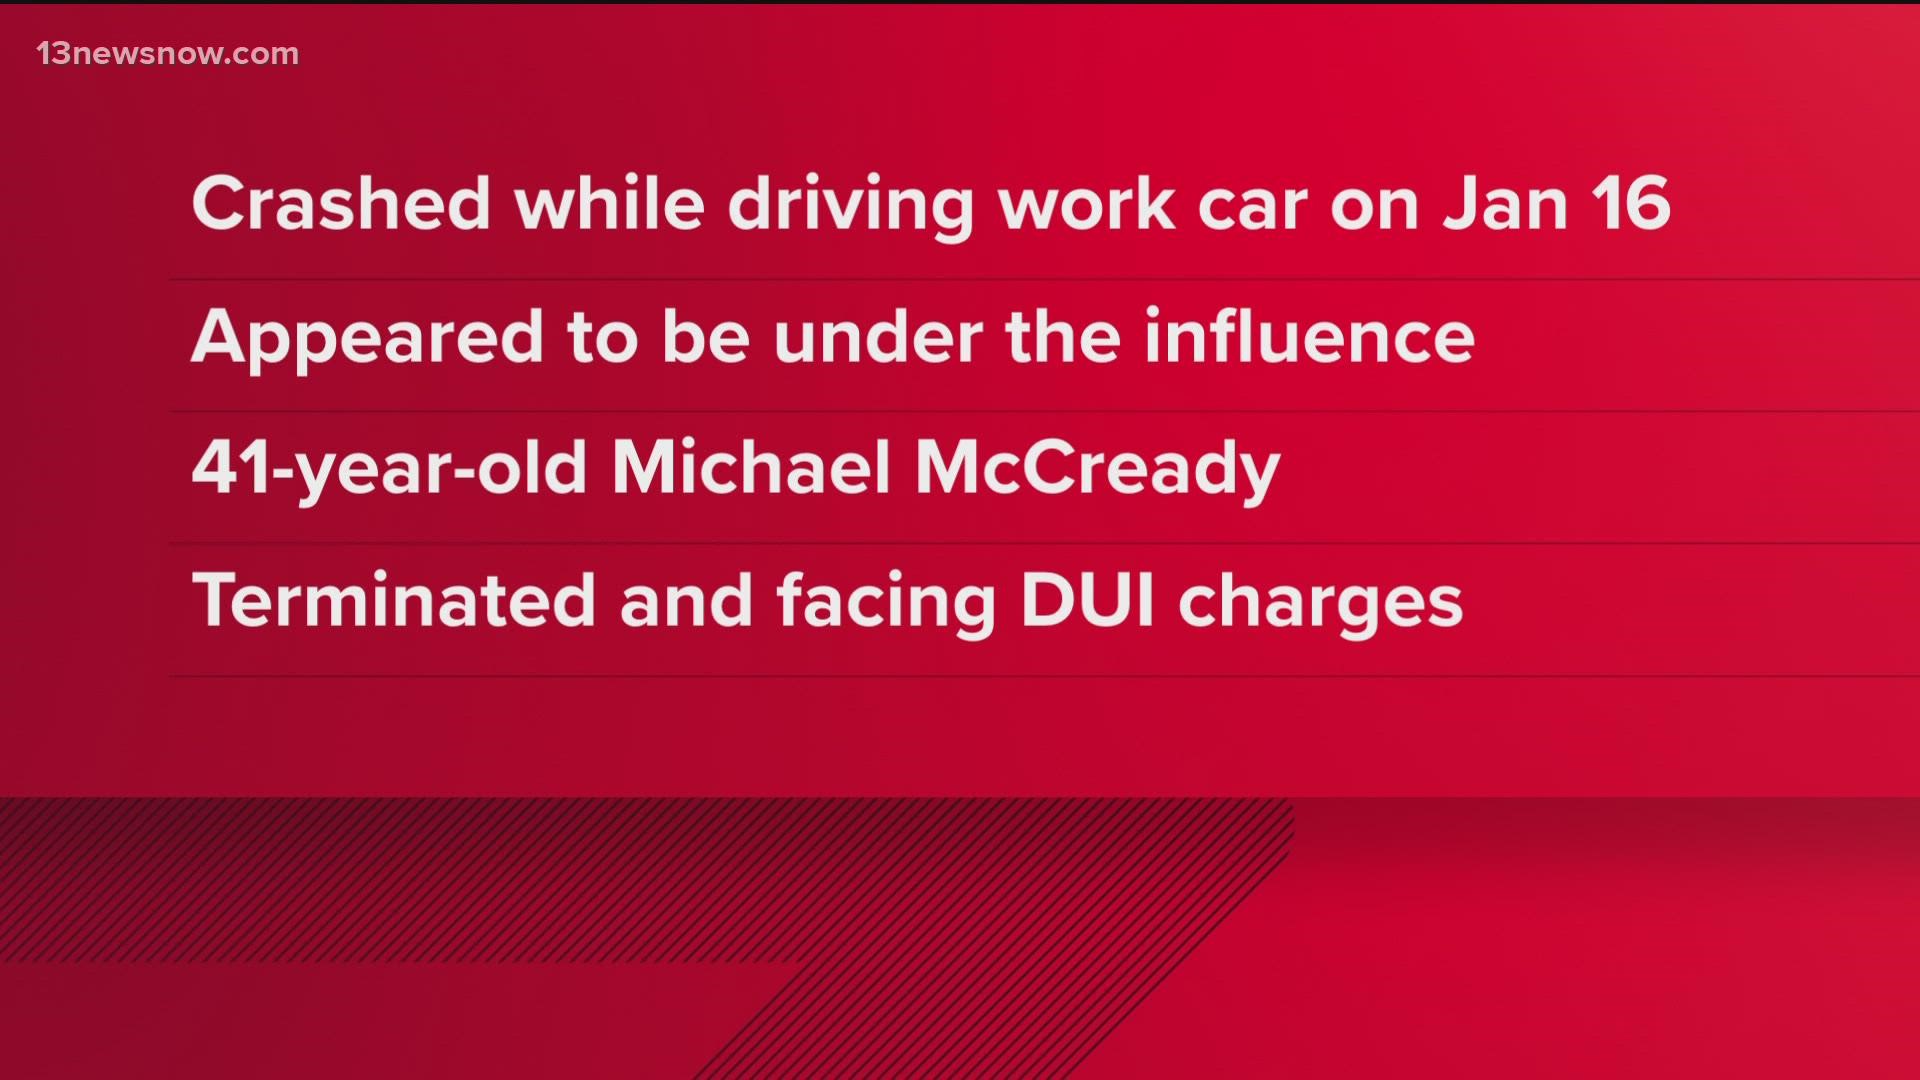 Investigator McCready was off-duty, driving his unmarked assigned car when the accident happened.